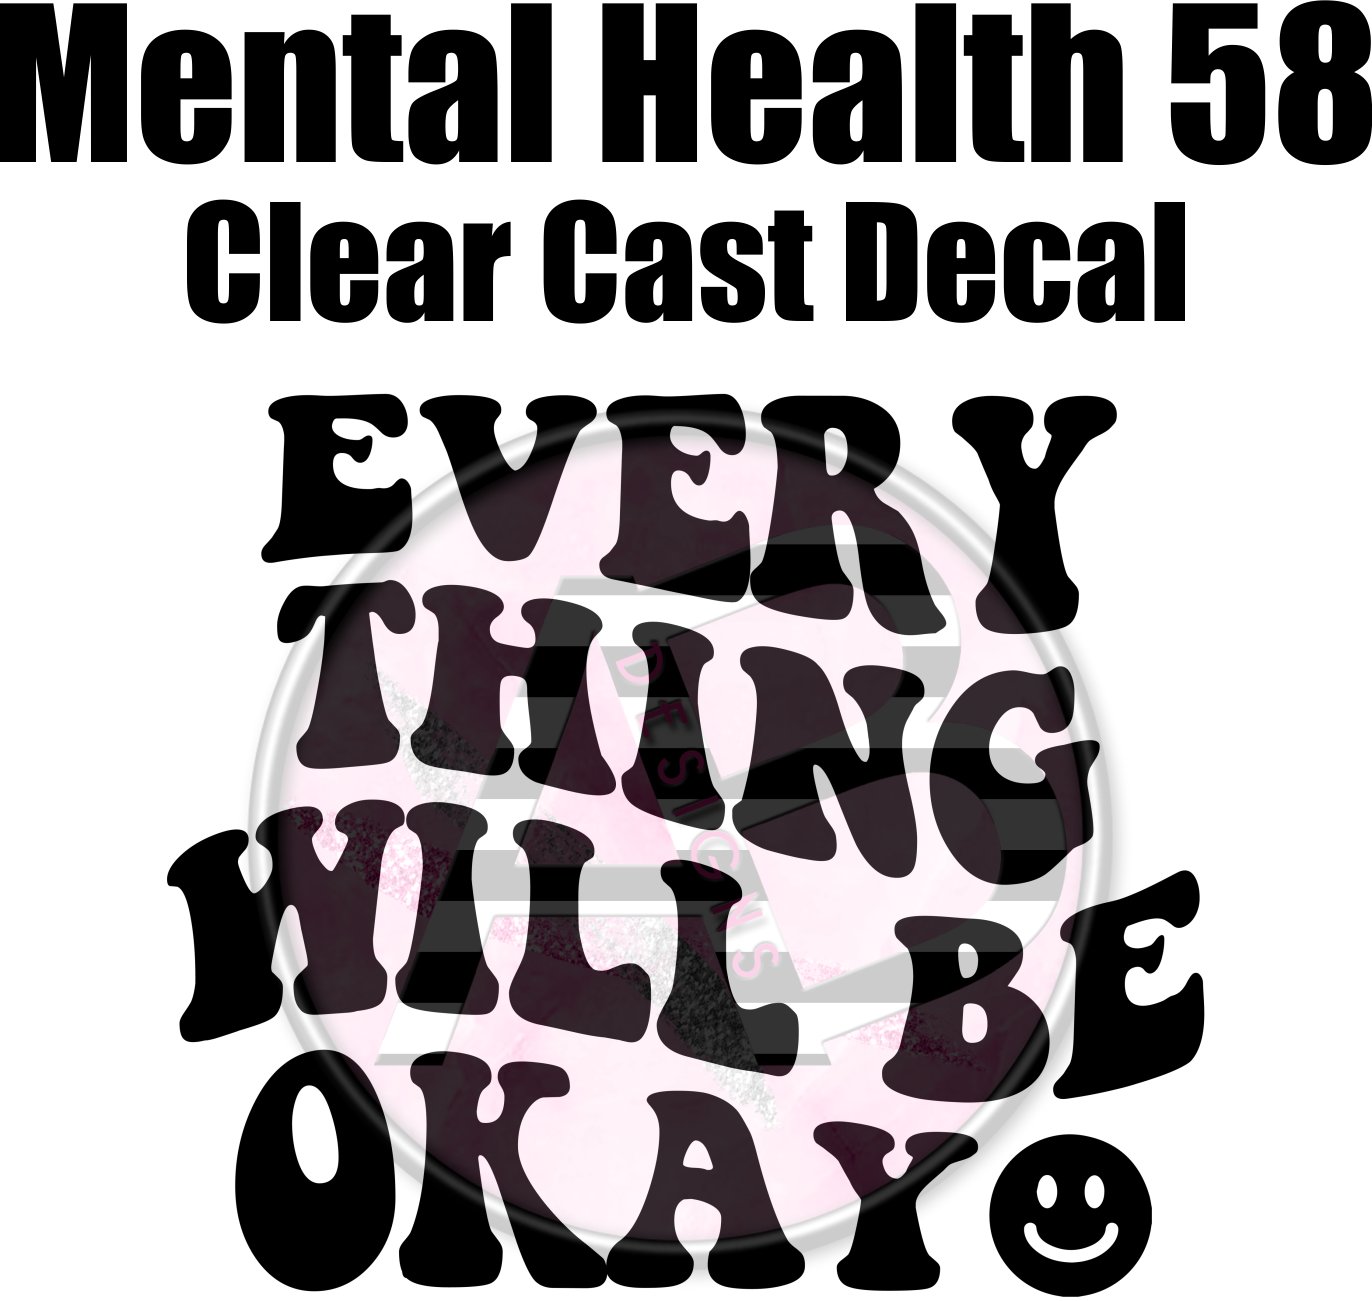 Mental Health 58 - Clear Cast Decal - 351